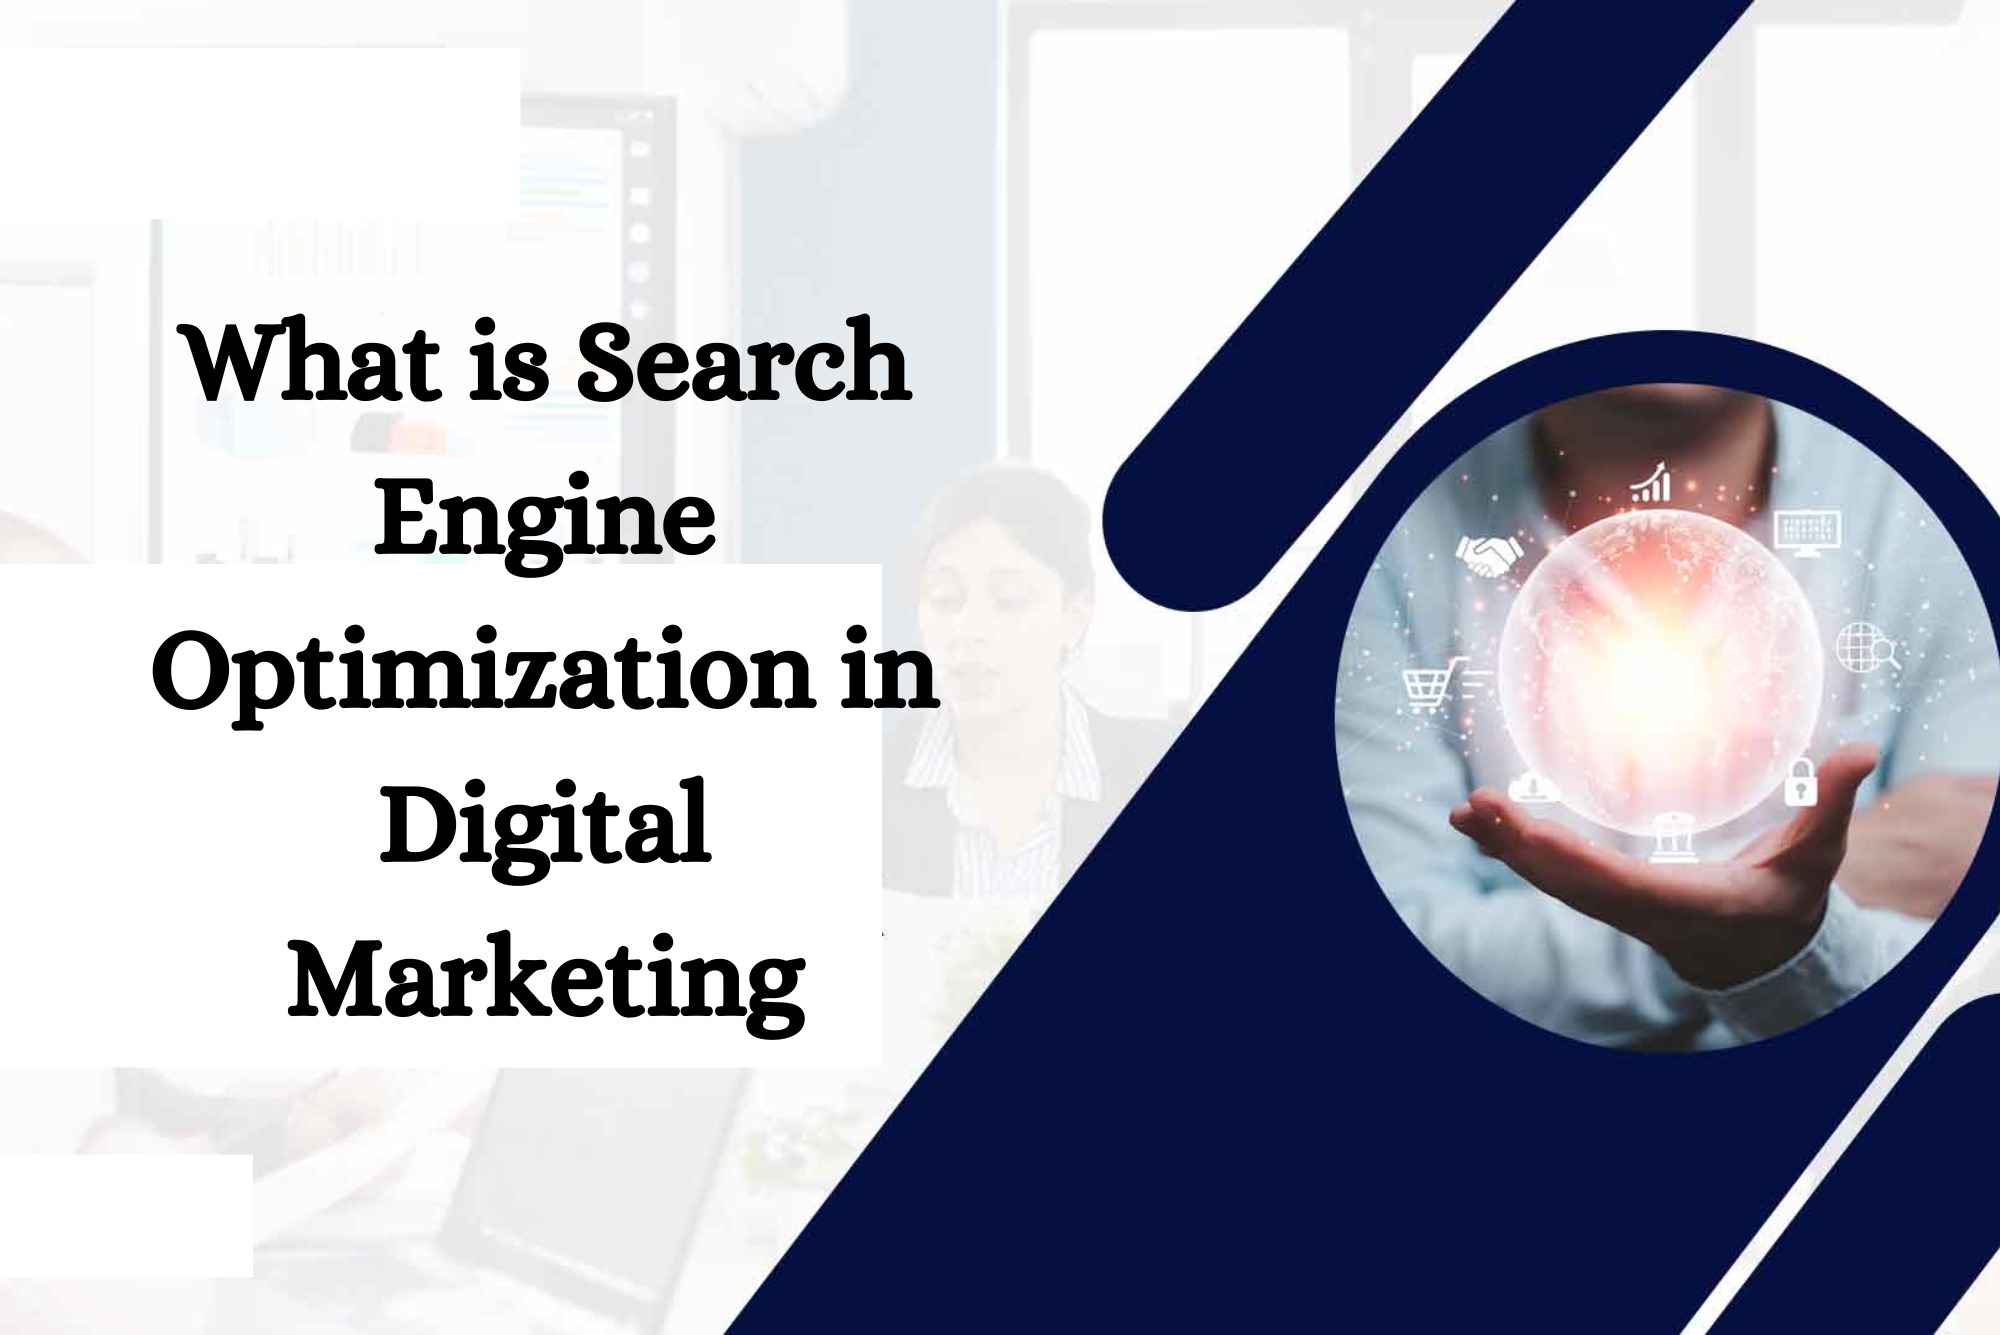 What is Search Engine Optimization in Digital Marketing